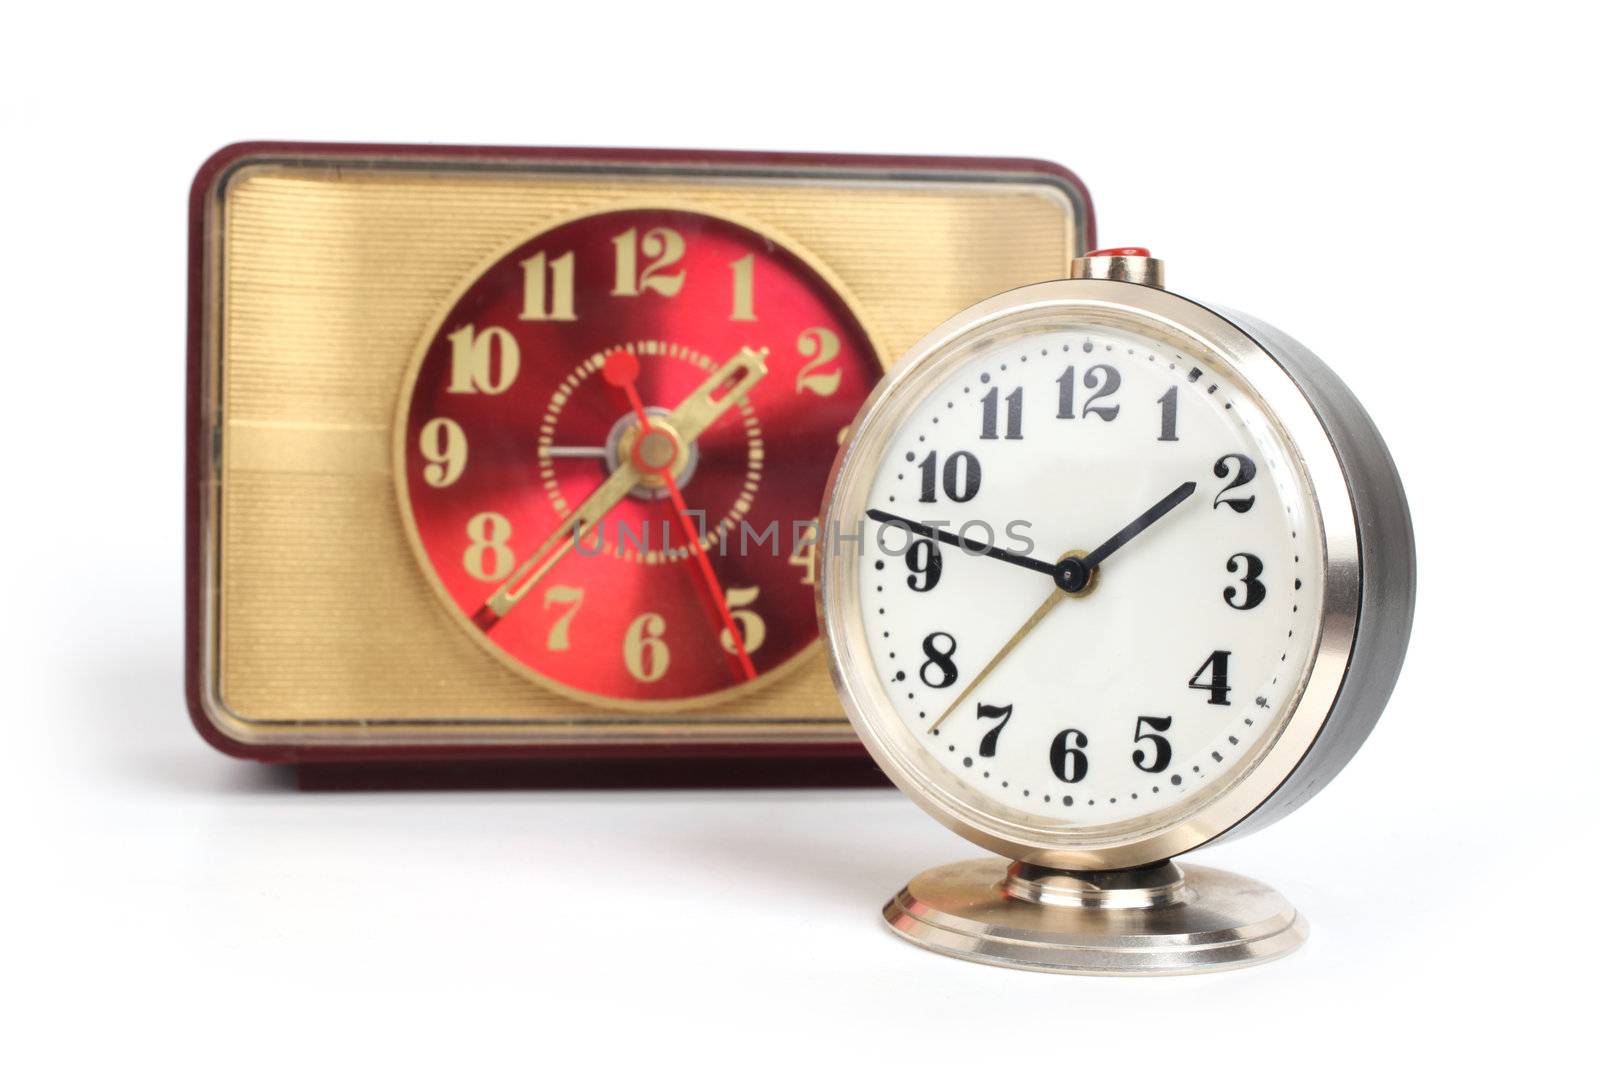 old alarm clock with gold trim on a white background